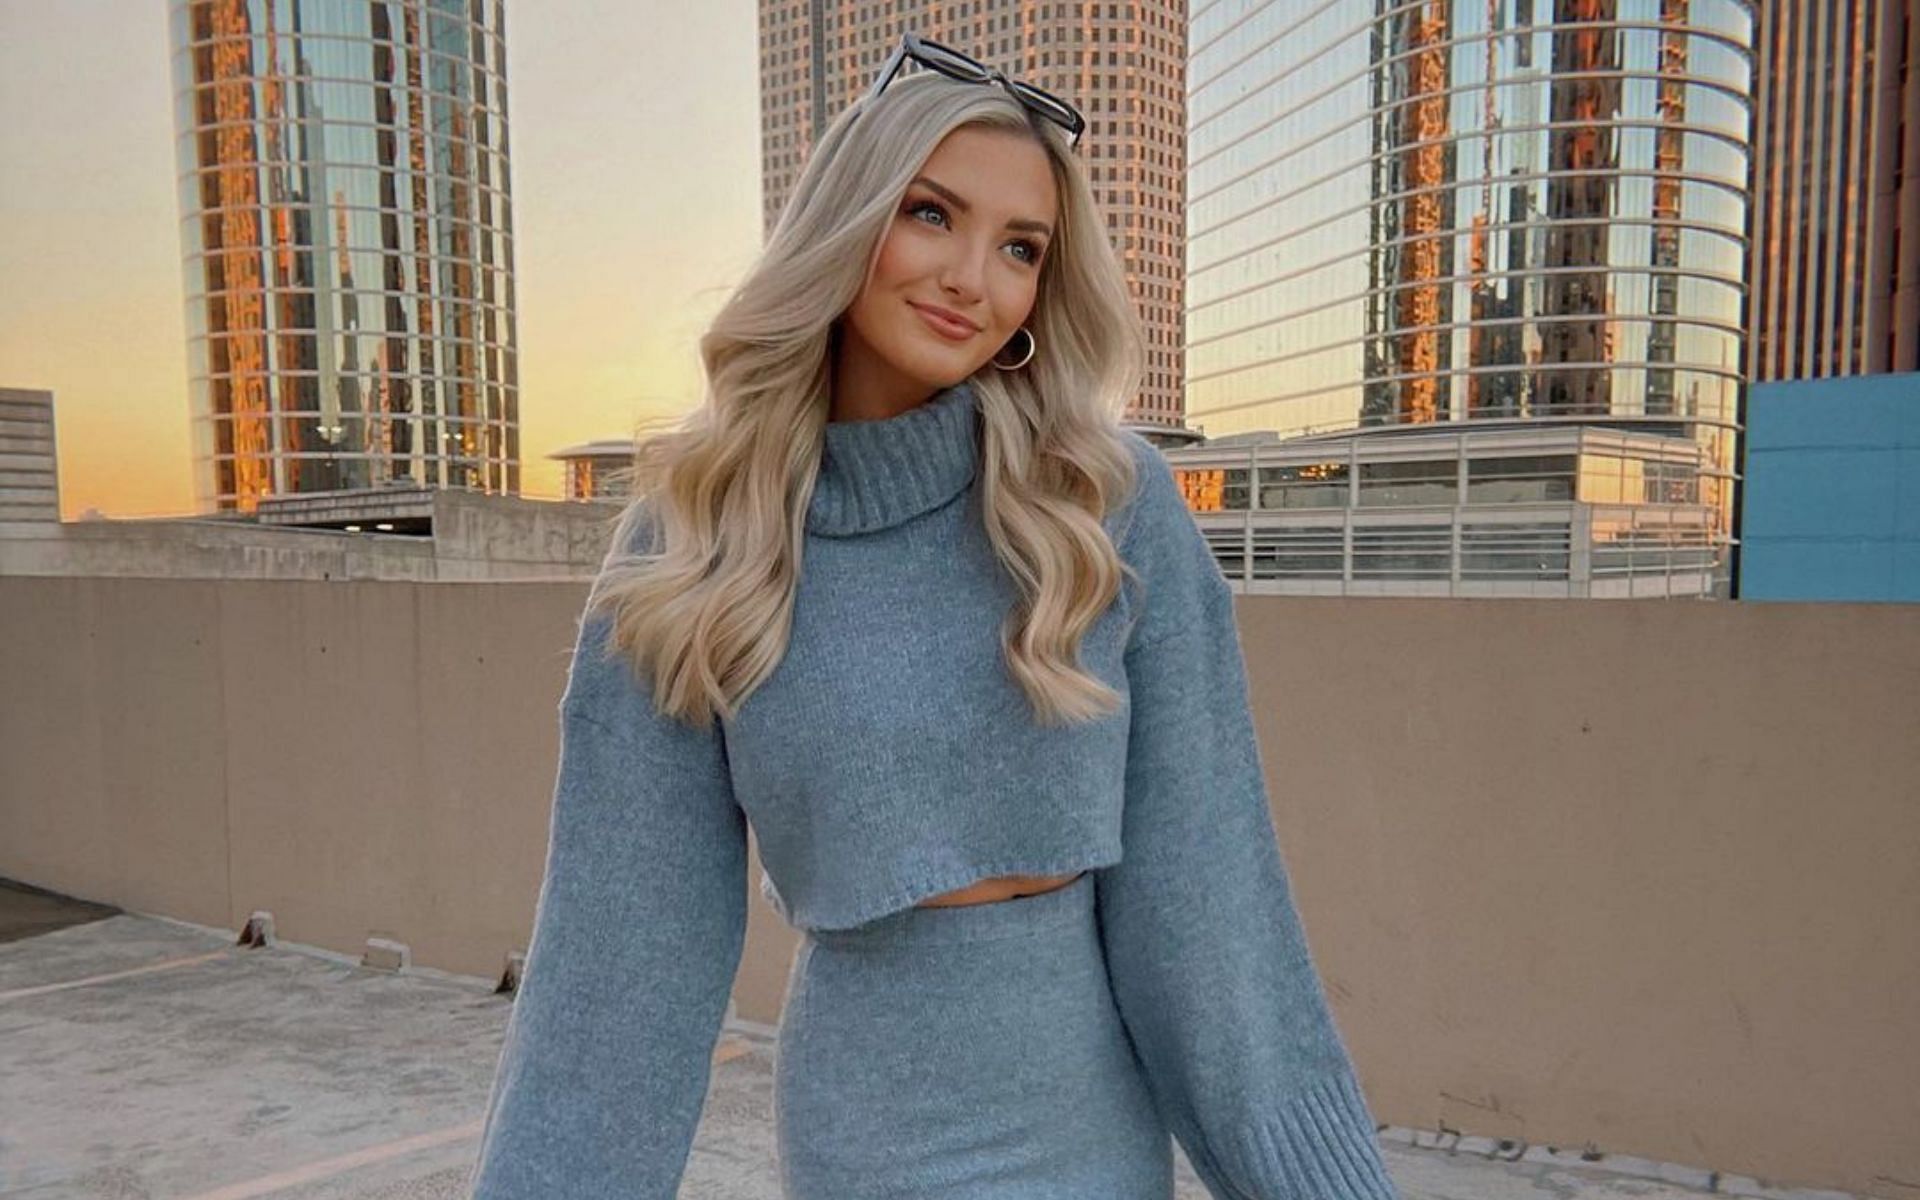 Meet Lyndsey Windham from &lsquo;The Bachelor&rsquo; (Image via lyndsey_windham/Instagram)